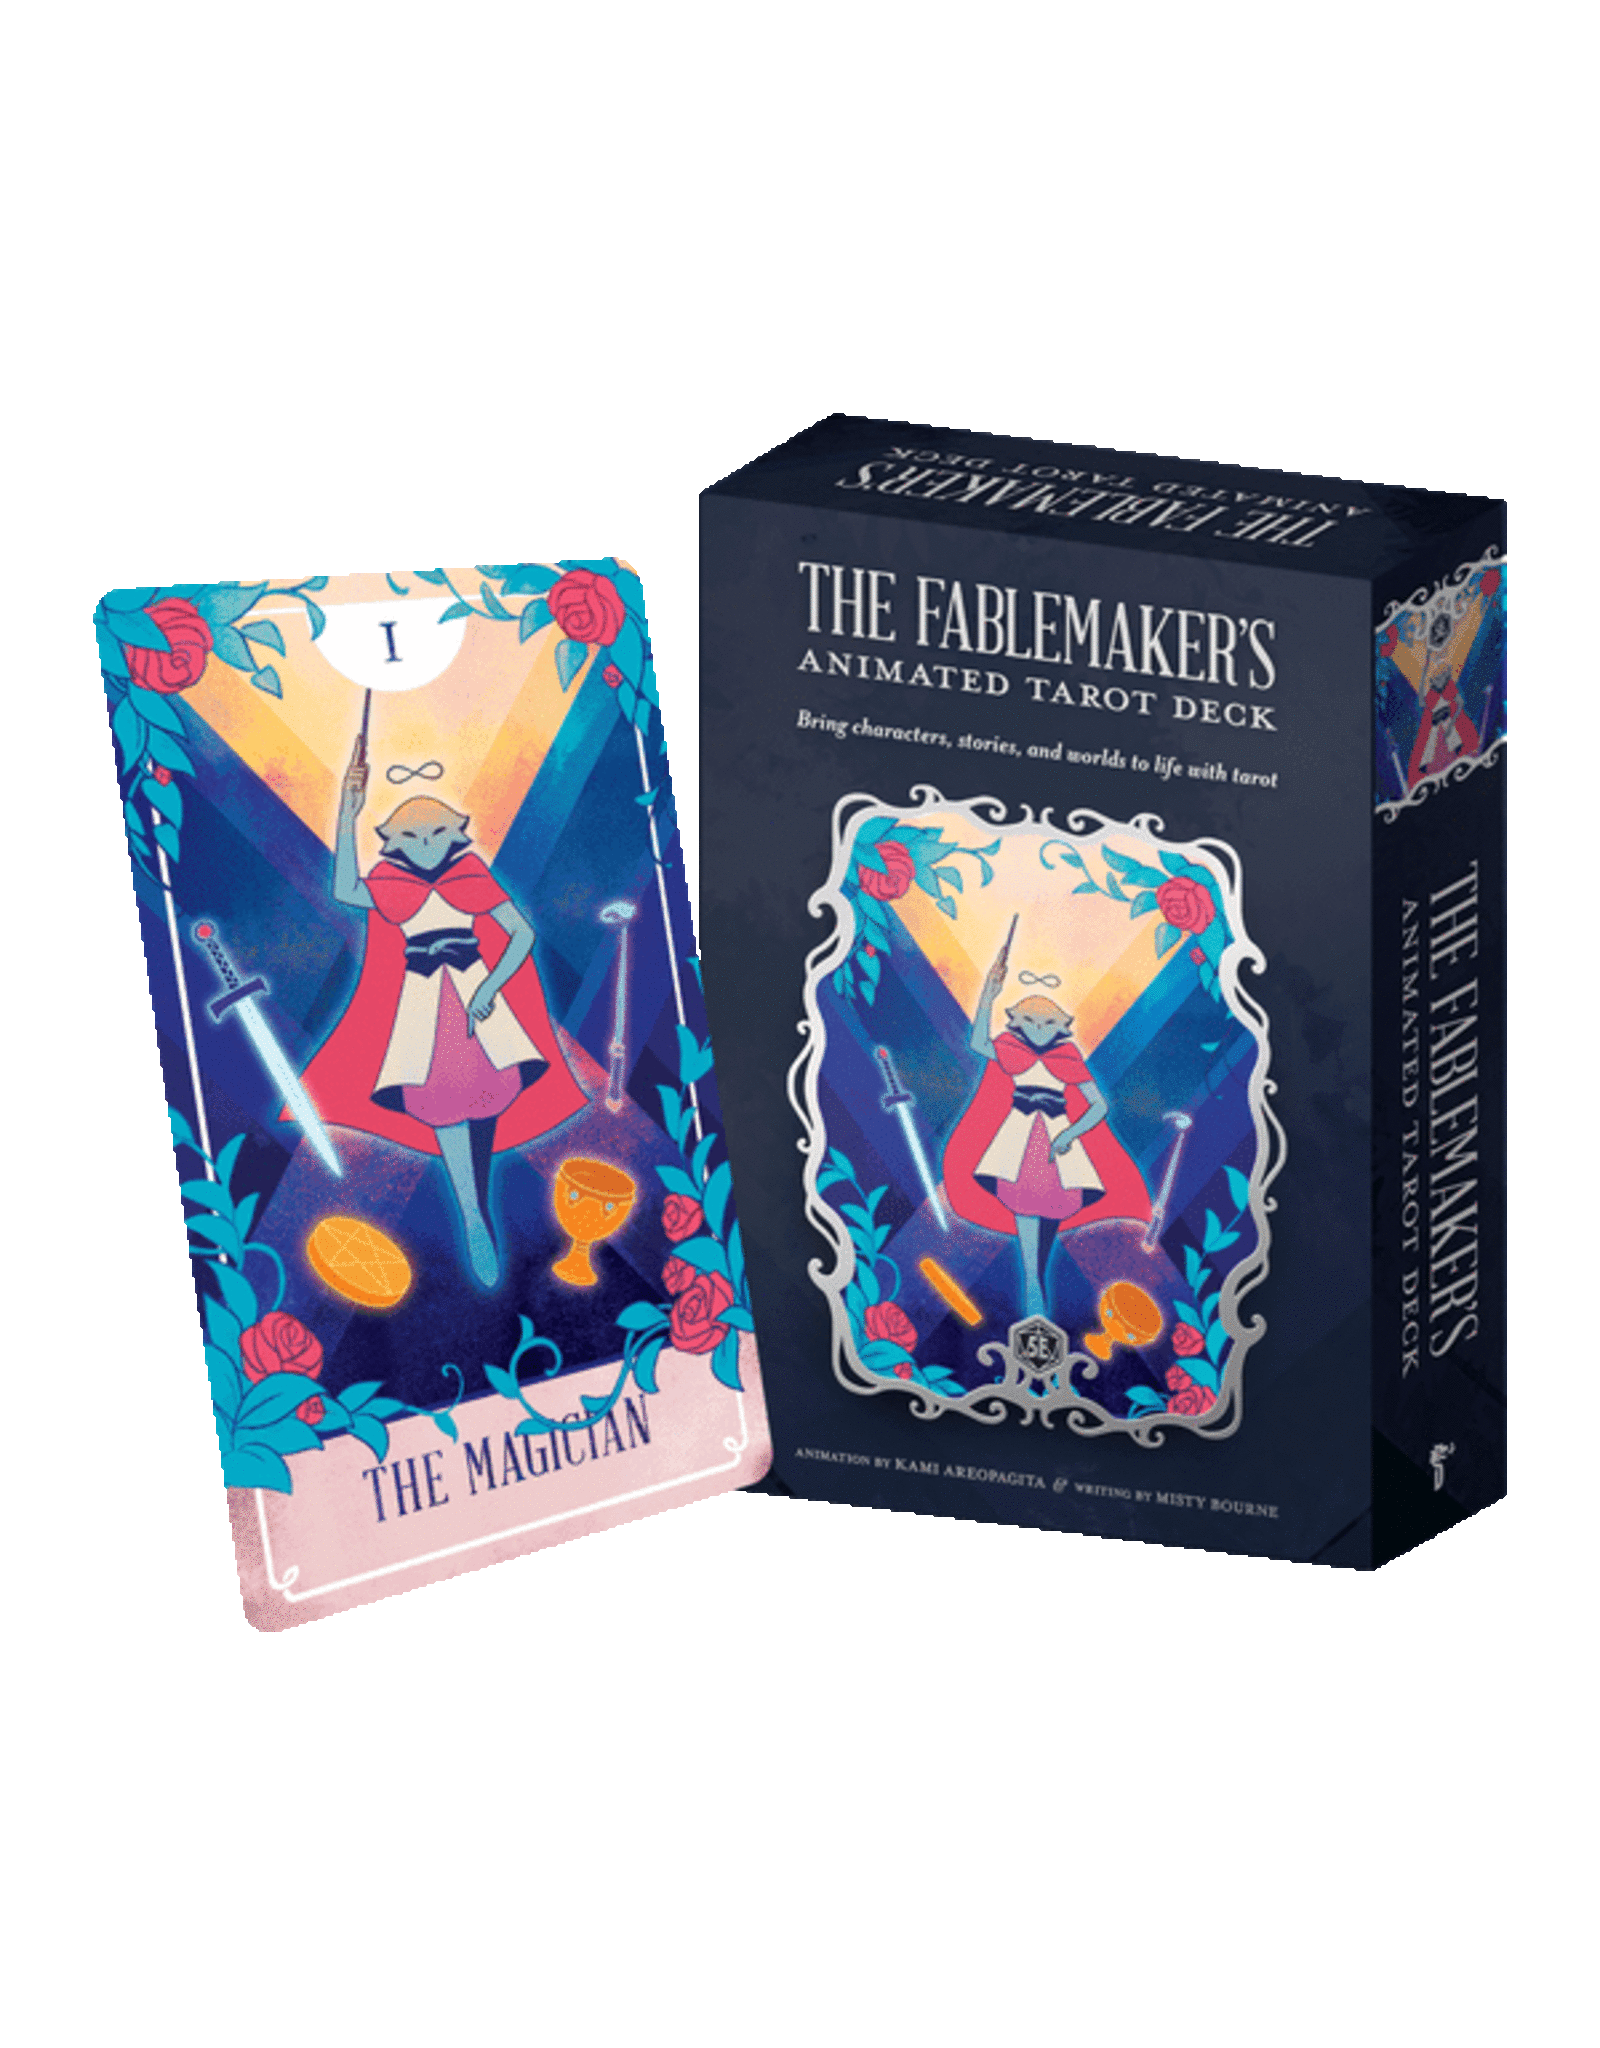 The Fablemaker's Animated Tarot Deck (Pre Order) - Black Diamond Games